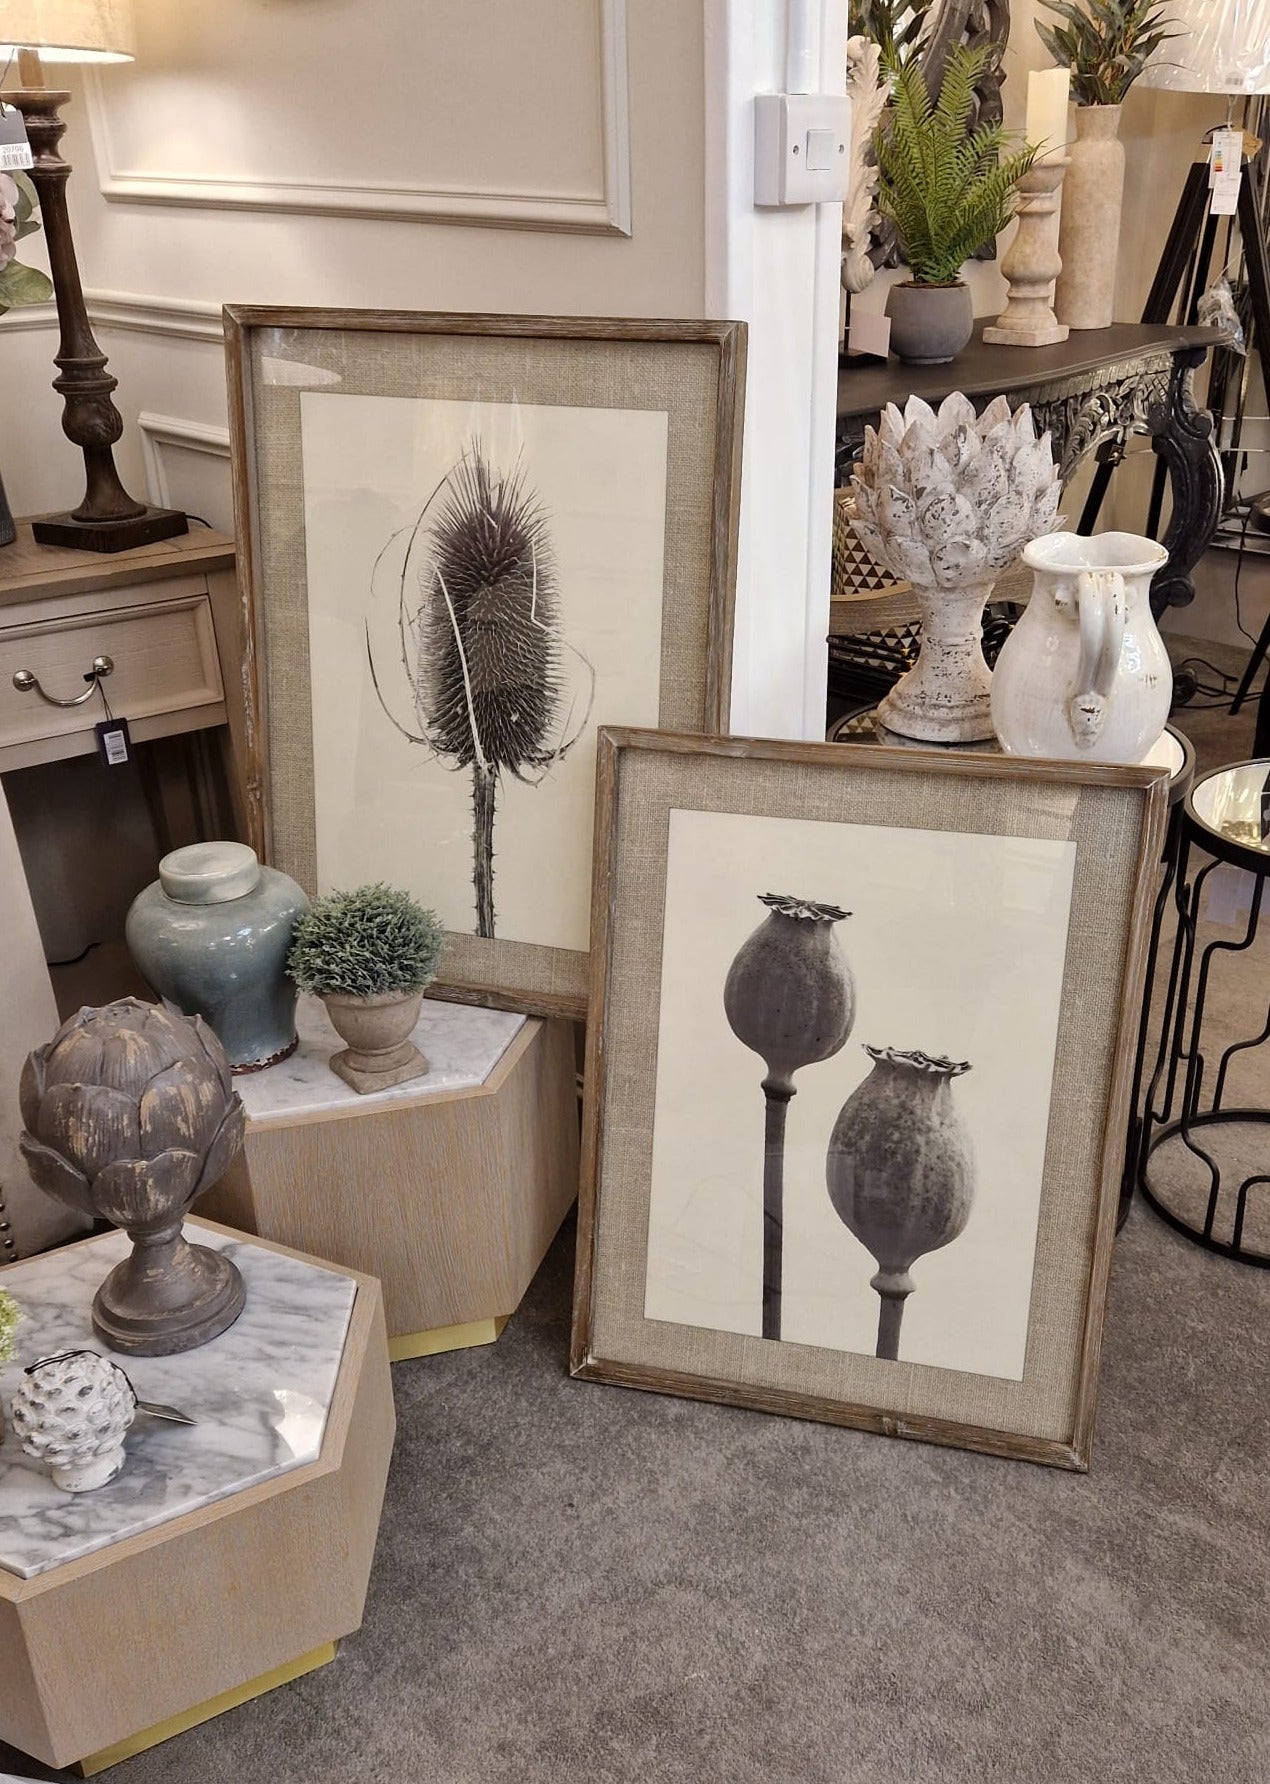 Pair of Poppy and Teasel Prints